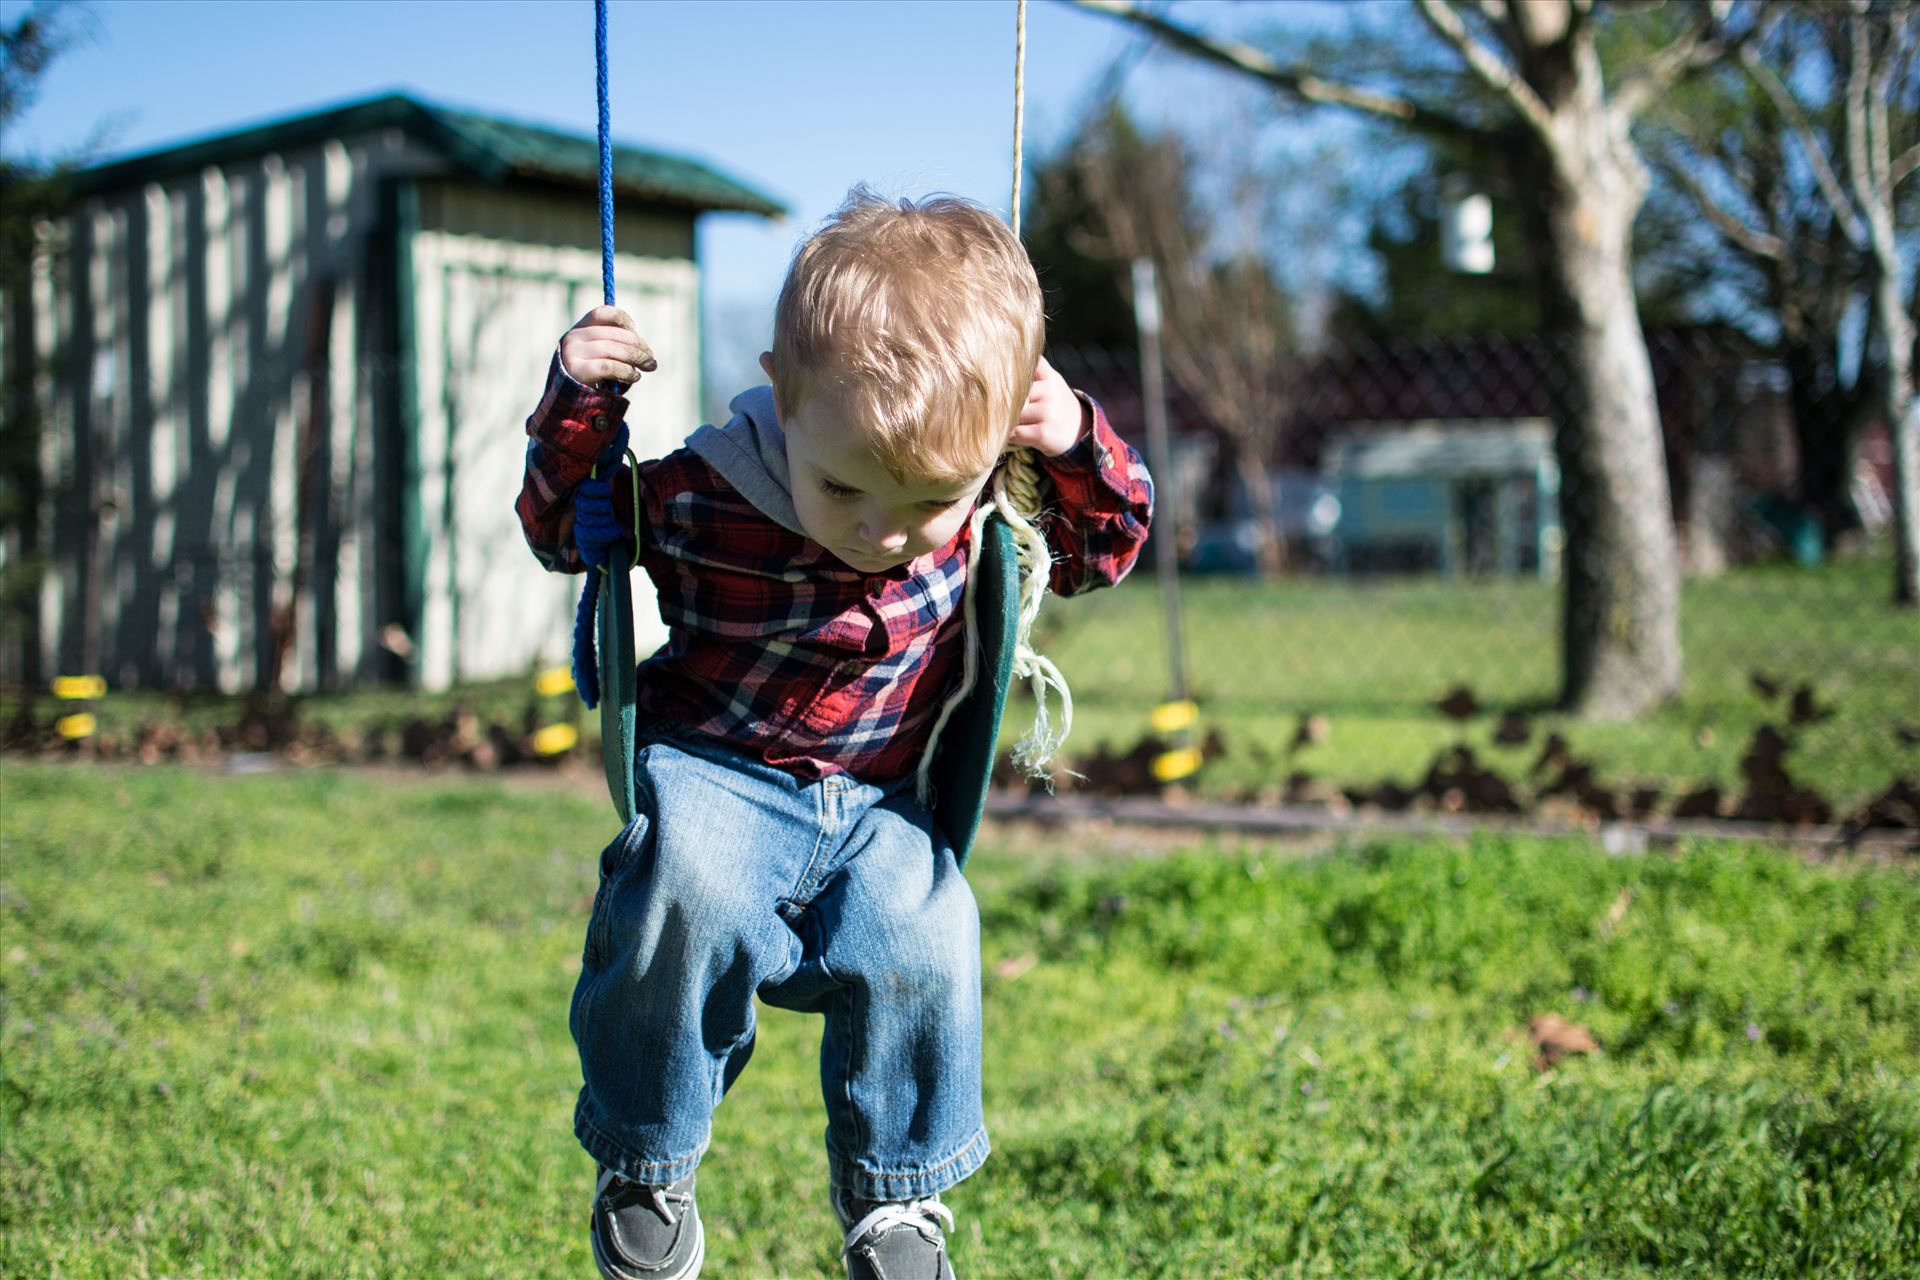 On the Swing  by Unbound Photography